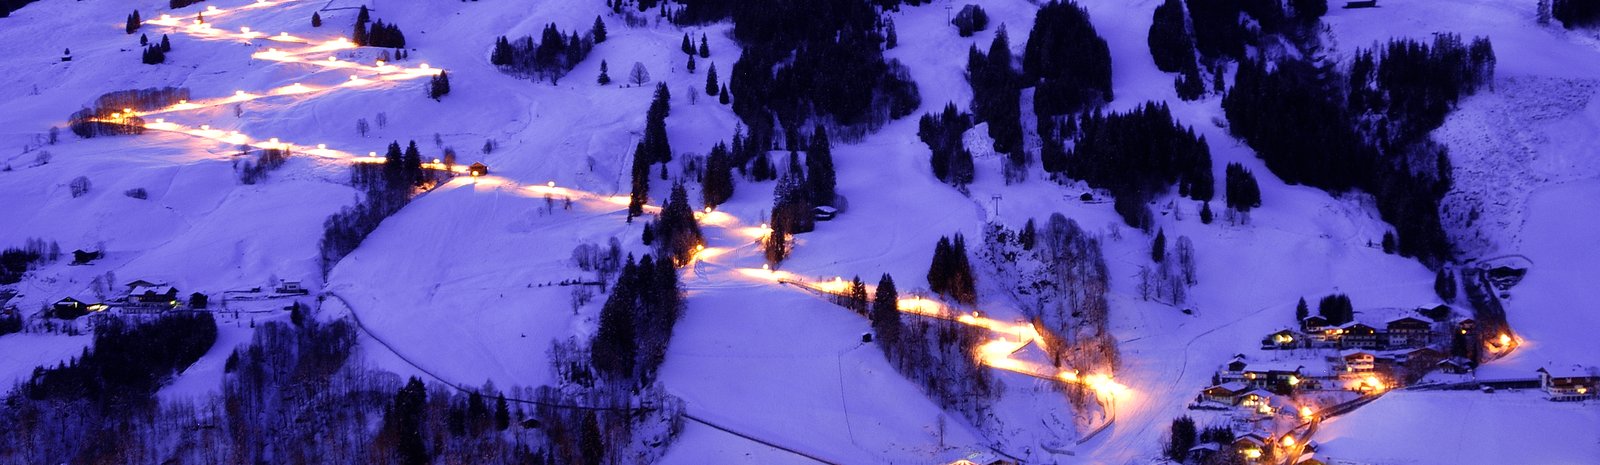 Picture of the tobogganing slope at night with beautiful lights | © Bergbahnen Saalbach Hinterglemm